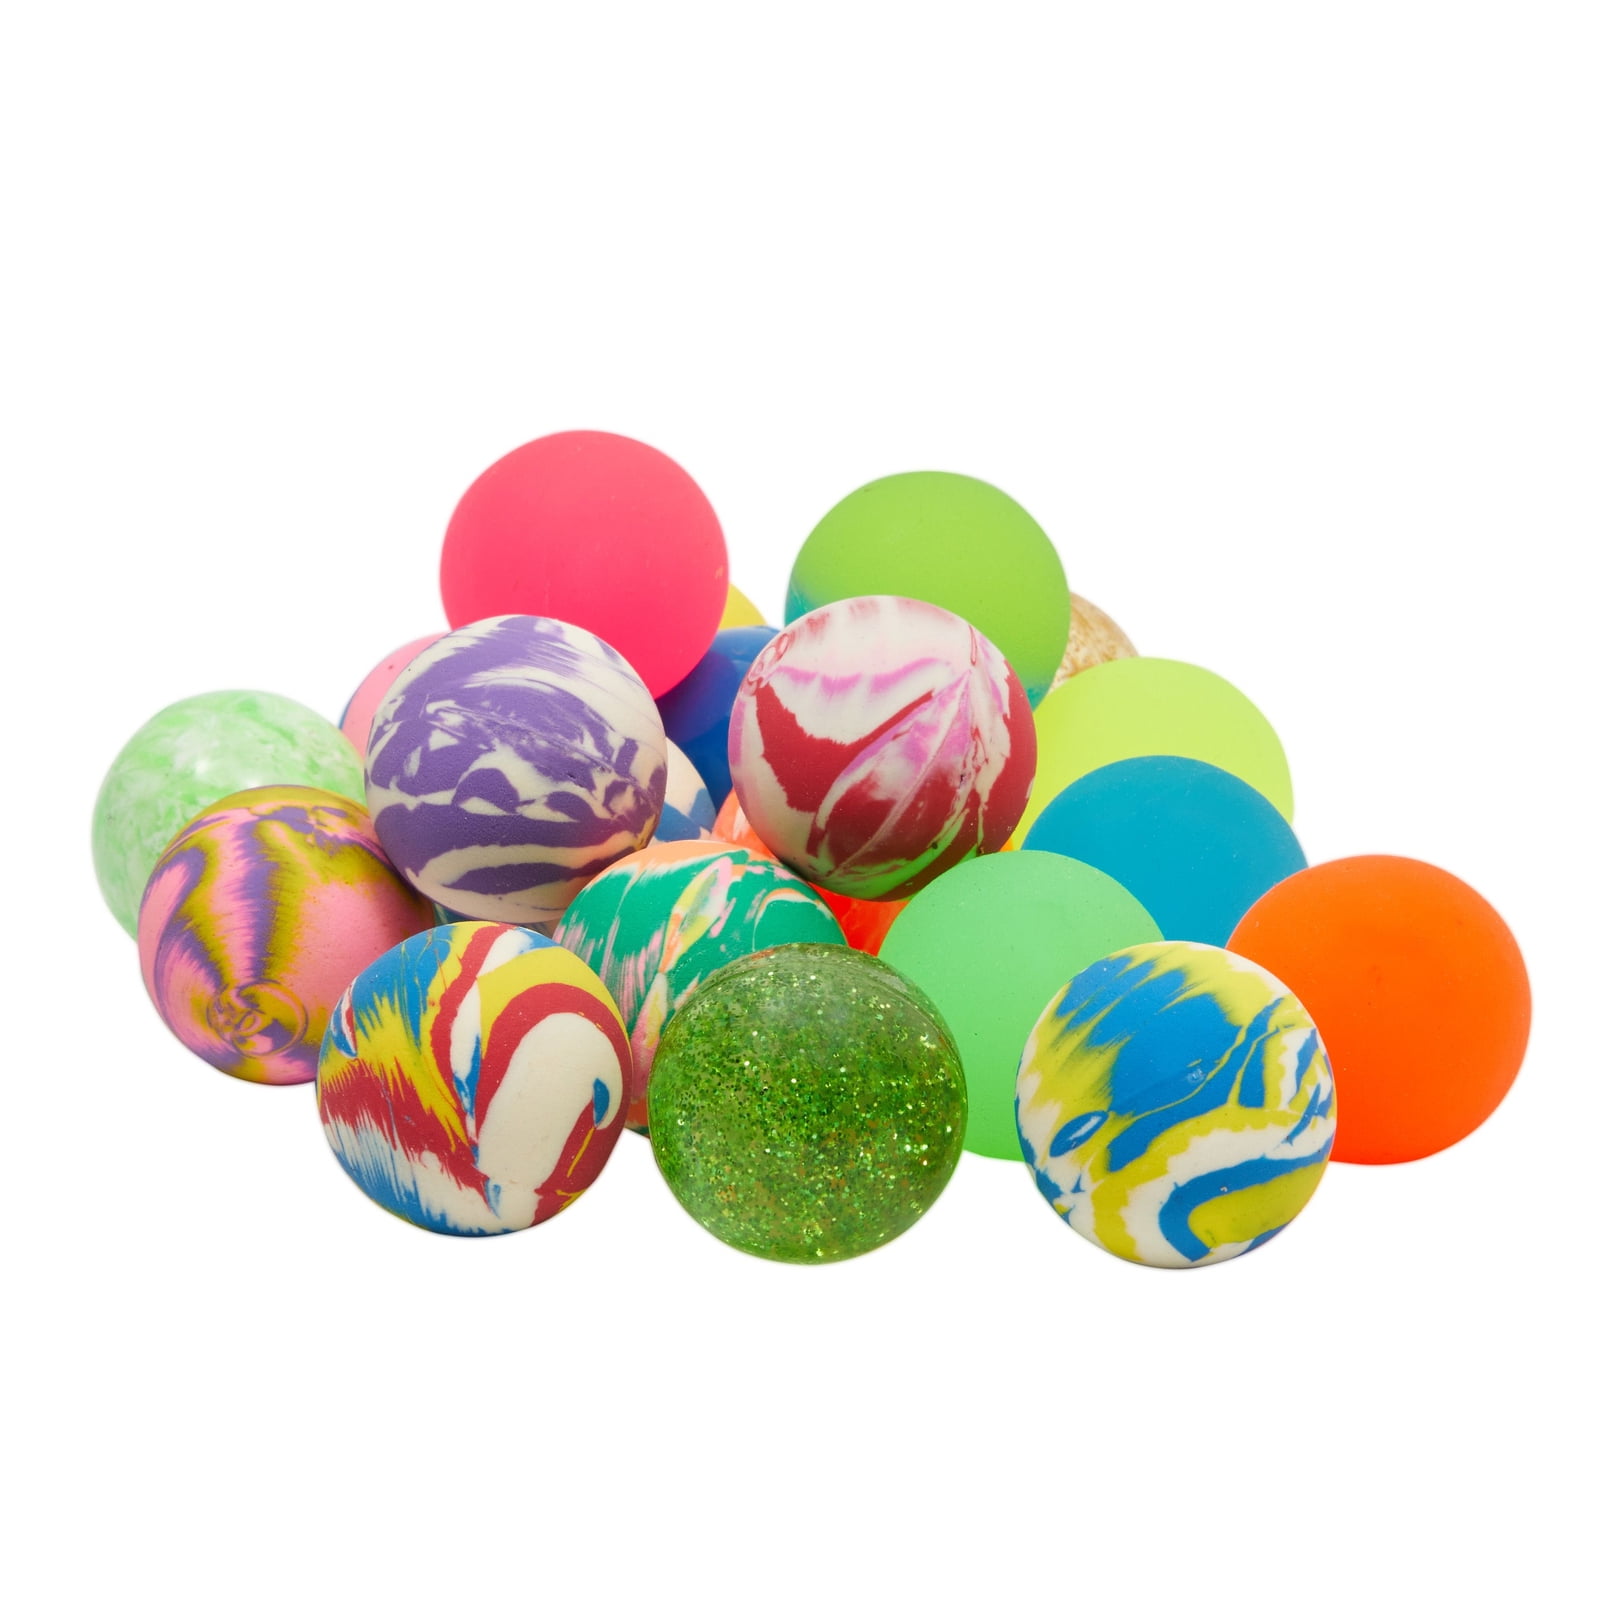 50 SMILE FACE SUPER HIGH BOUNCE BALLS 27MM 1" HI BOUNCY SUPERBALL PARTY FAVORS 